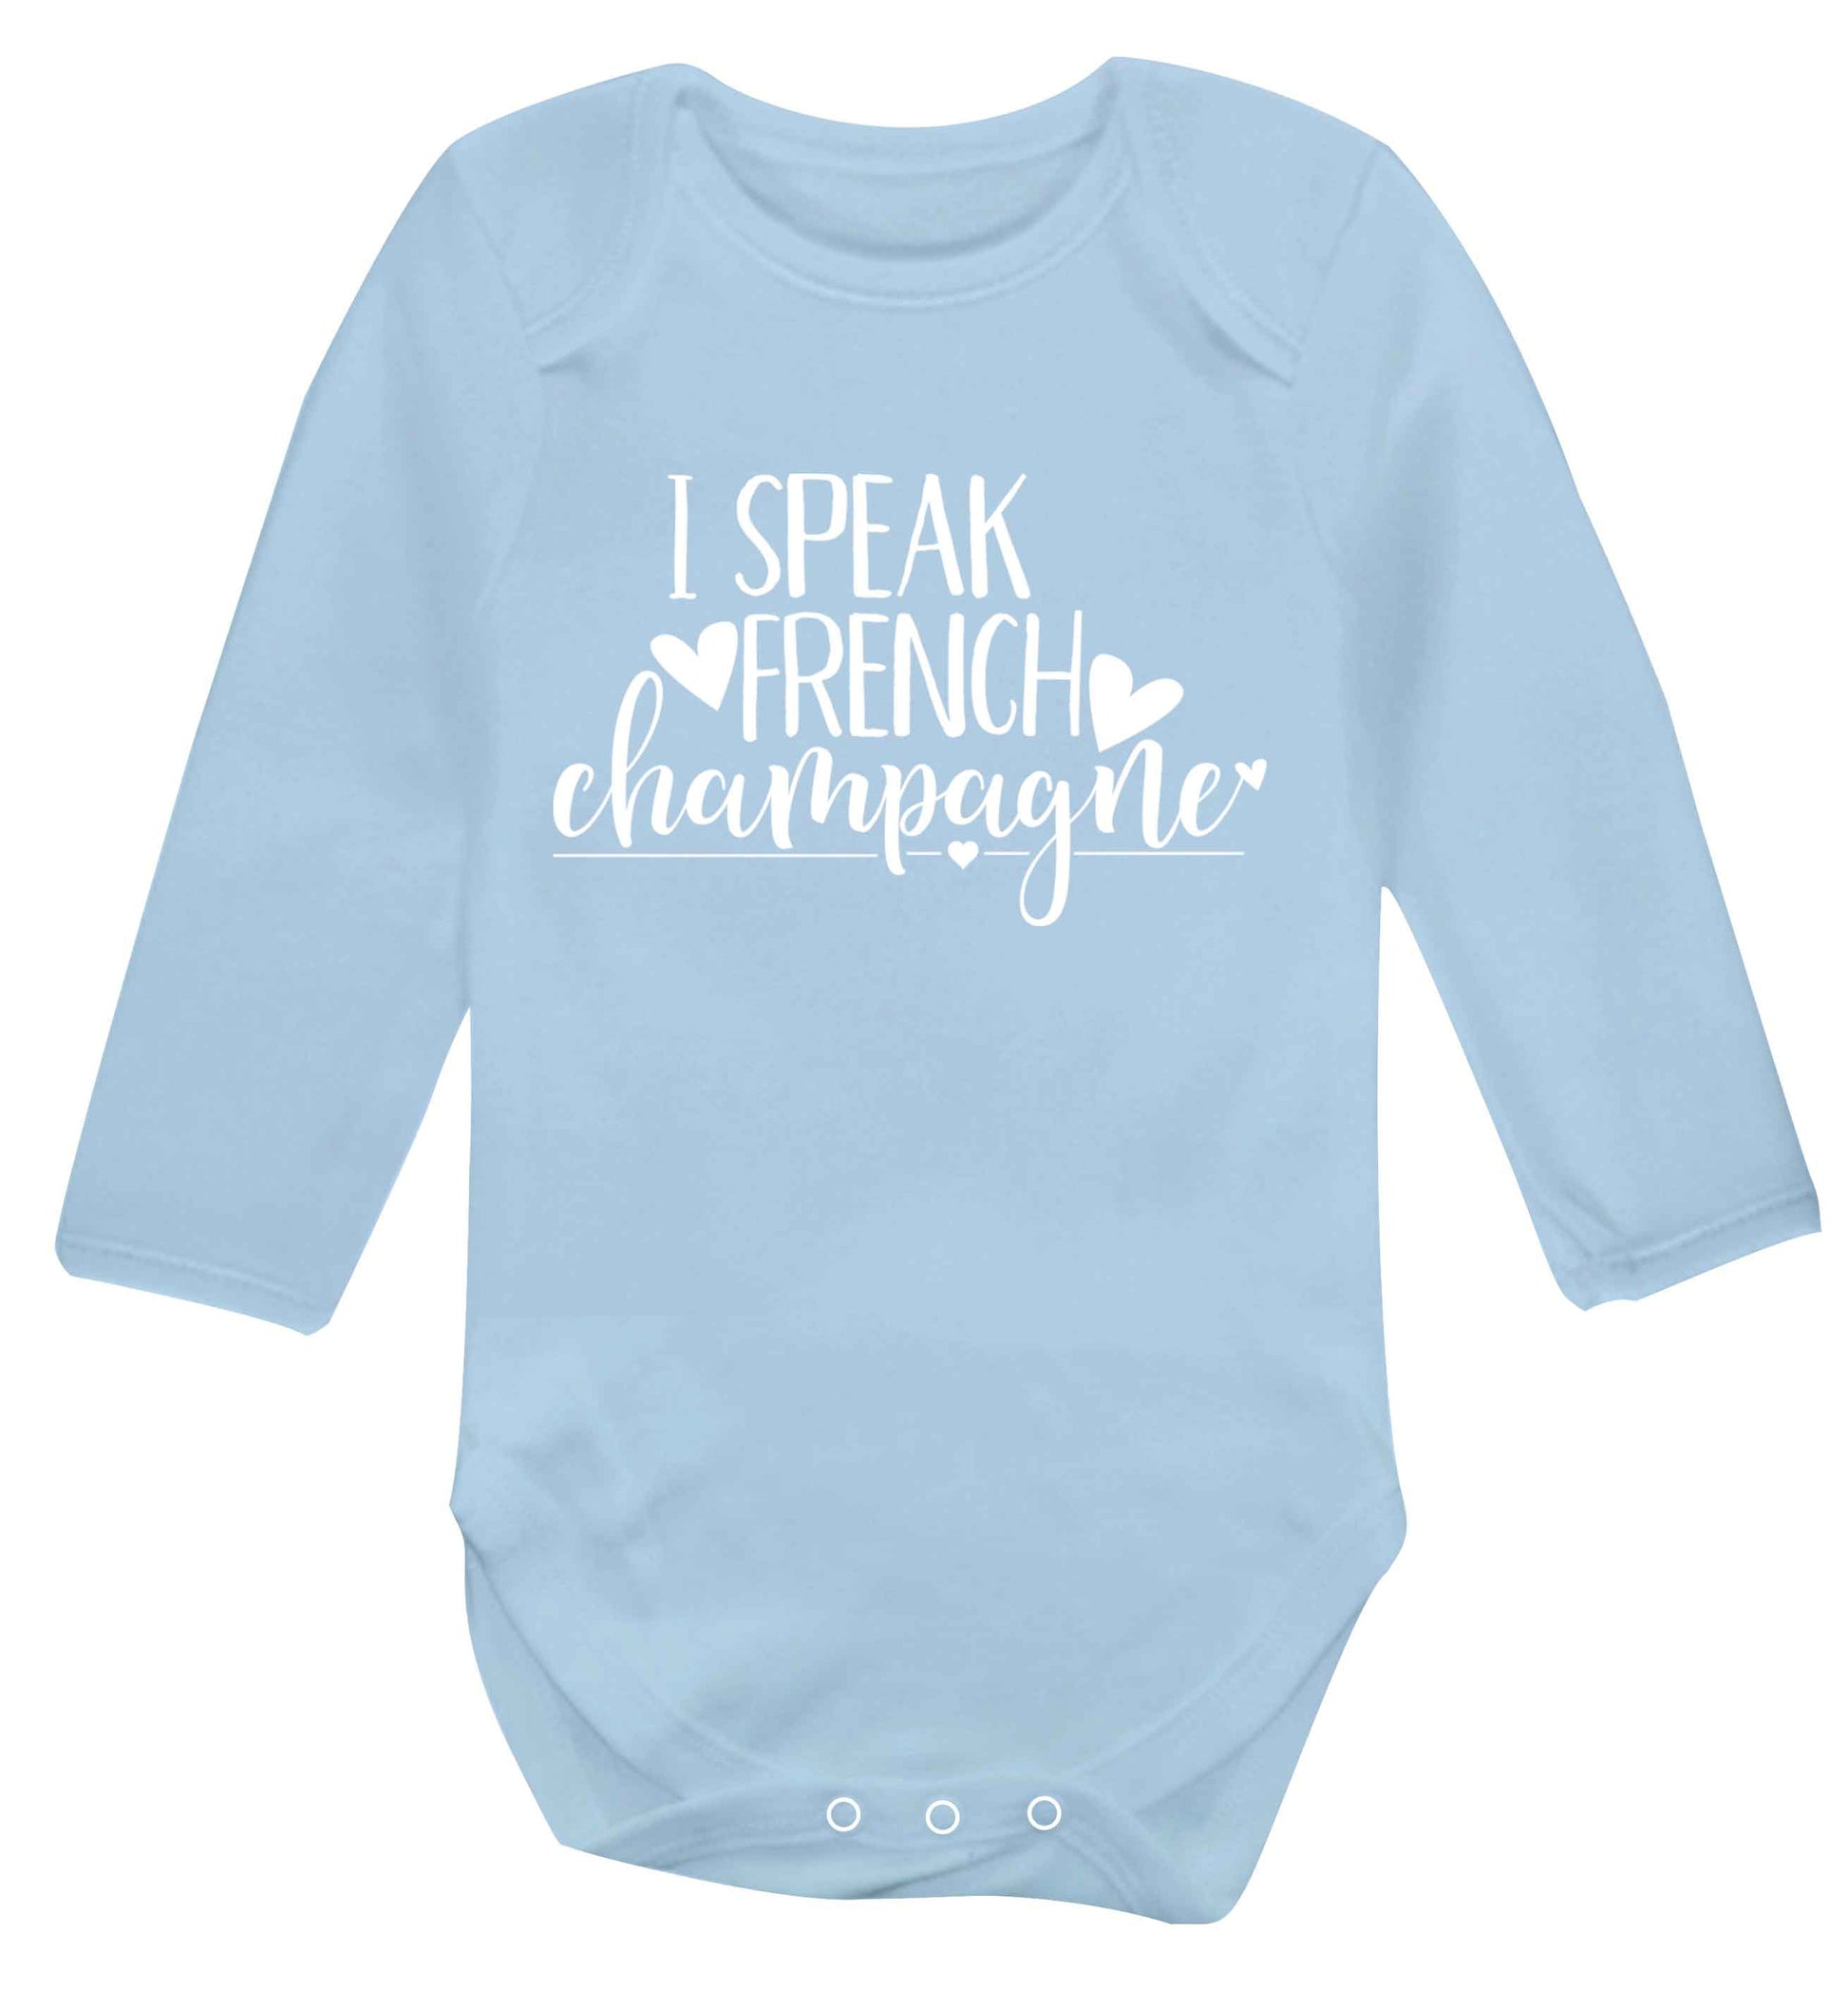 I speak french champagne Baby Vest long sleeved pale blue 6-12 months